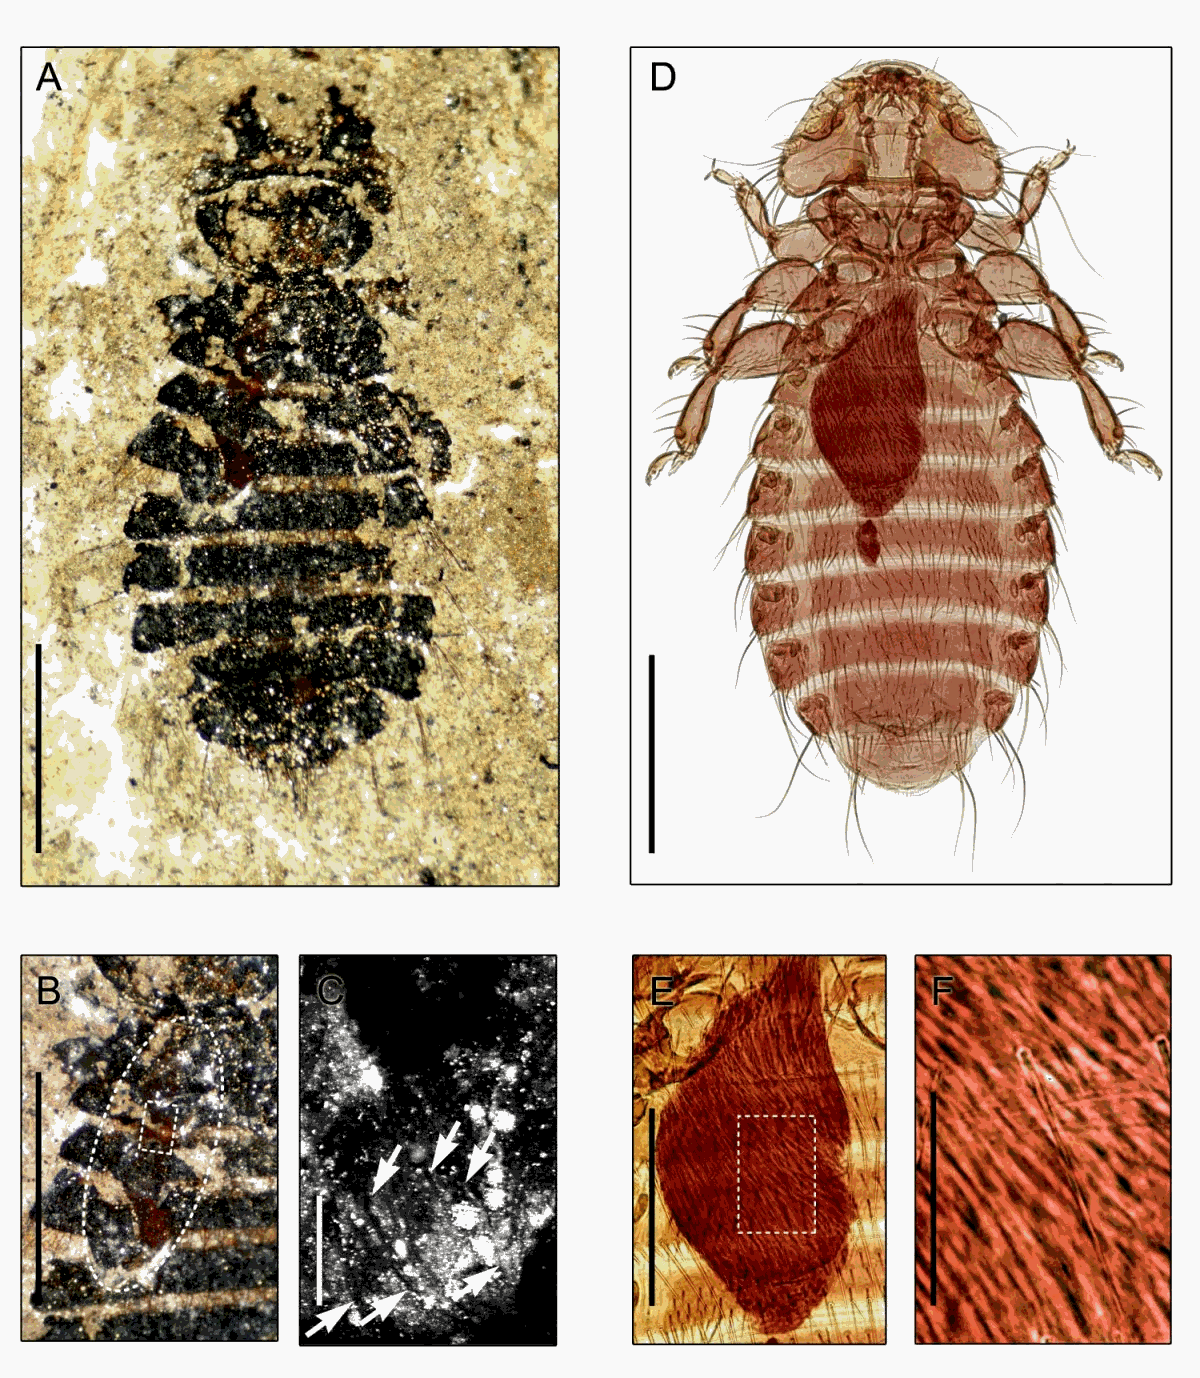 http://images.google.com/imgres?imgurl=http://vsmith.info/files/papers/fossil/download/Fig1.jpg&imgrefurl=http://vsmith.info/Louse-Fossil&usg=__nn4Xme7Vrt0RyBpgjripPe6yhLA=&h=1378&w=1200&sz=407&hl=en&start=5&tbnid=W7dW1FXhadkwWM:&tbnh=150&tbnw=131&prev=/images%3Fq%3Dvincent%2Bsmith%2B%252B%2Bfeather%2Blice%26gbv%3D2%26hl%3Den